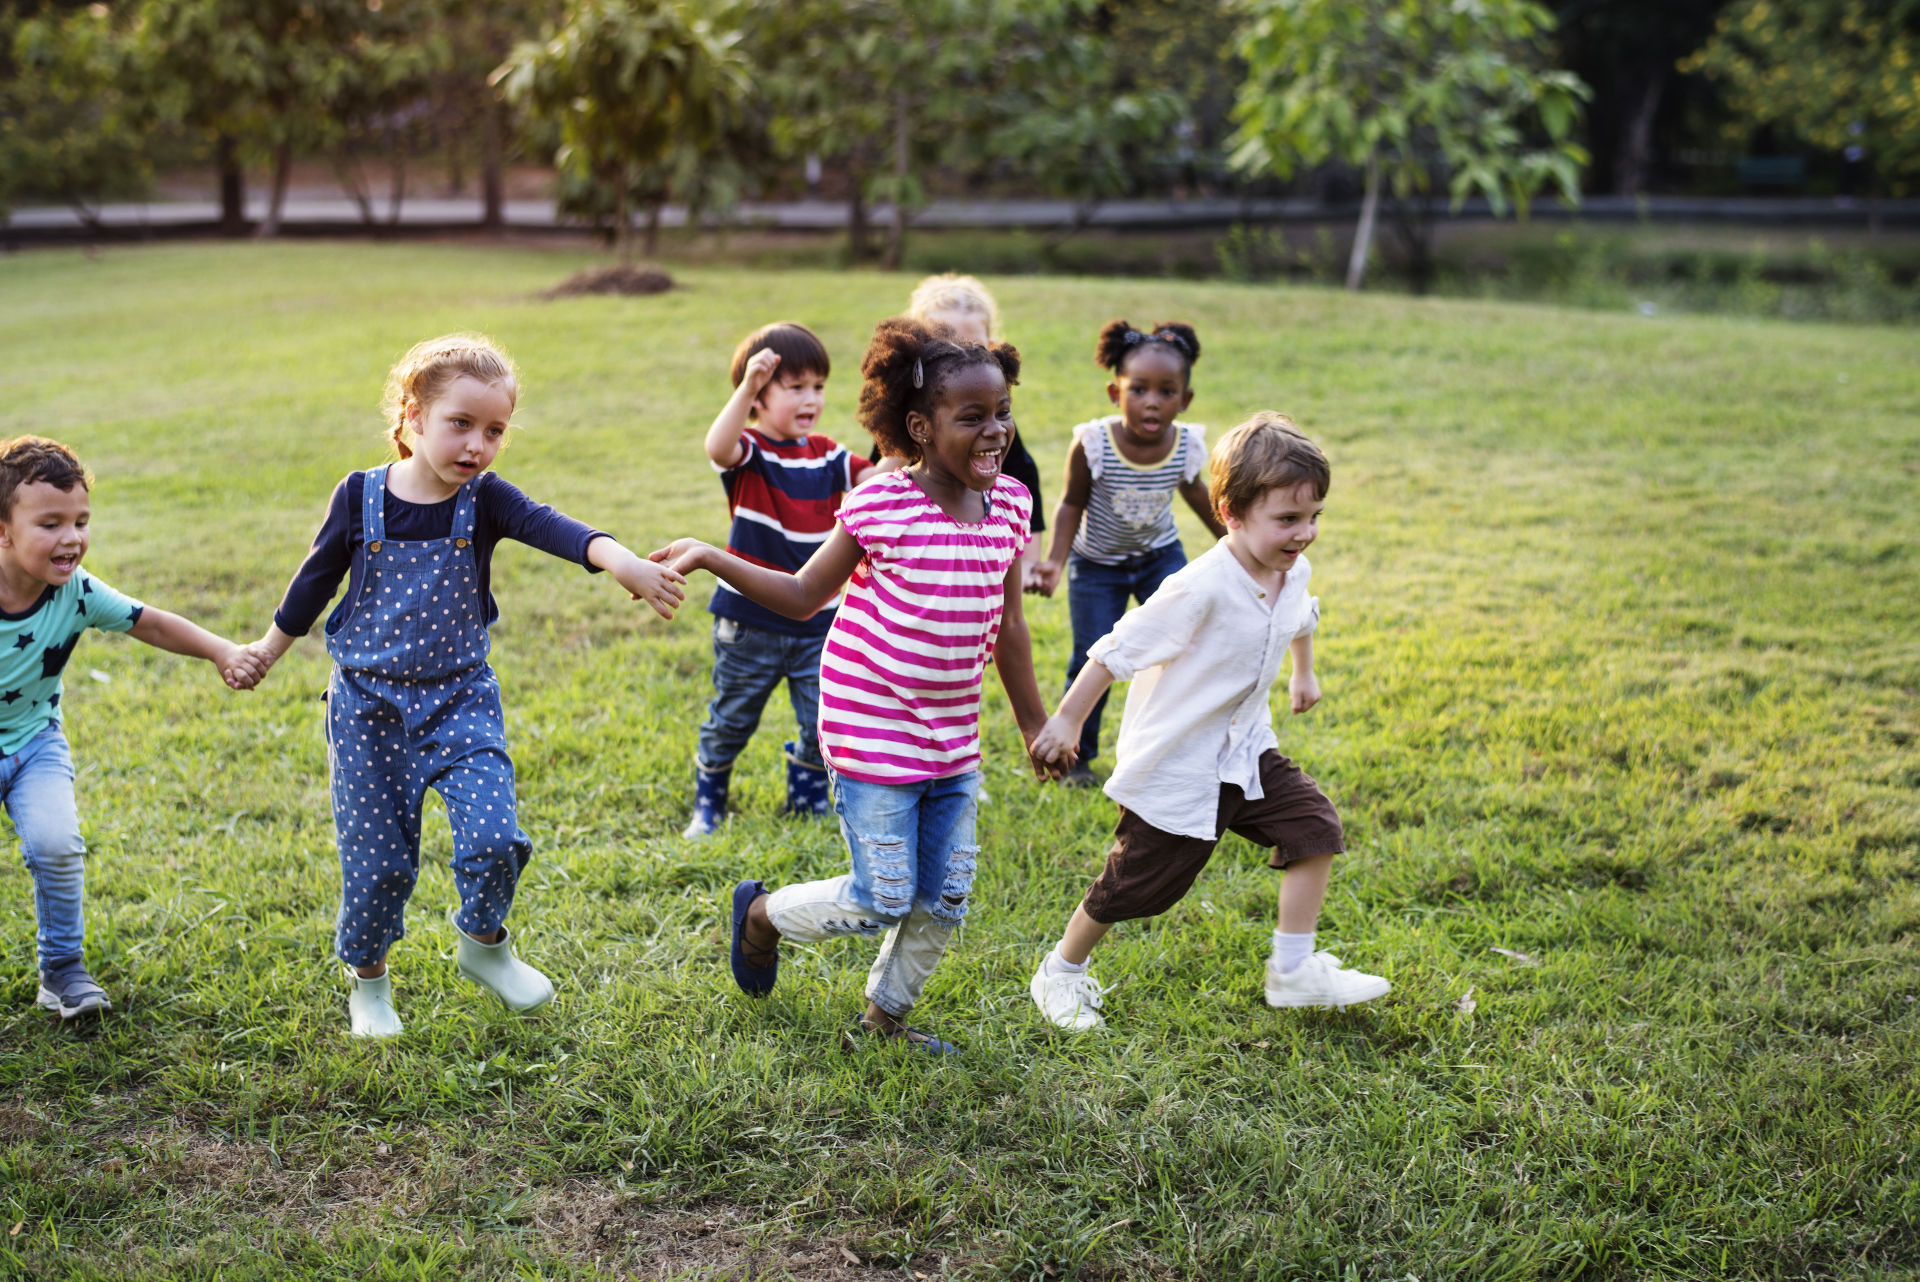 Group of children holding hands and running together